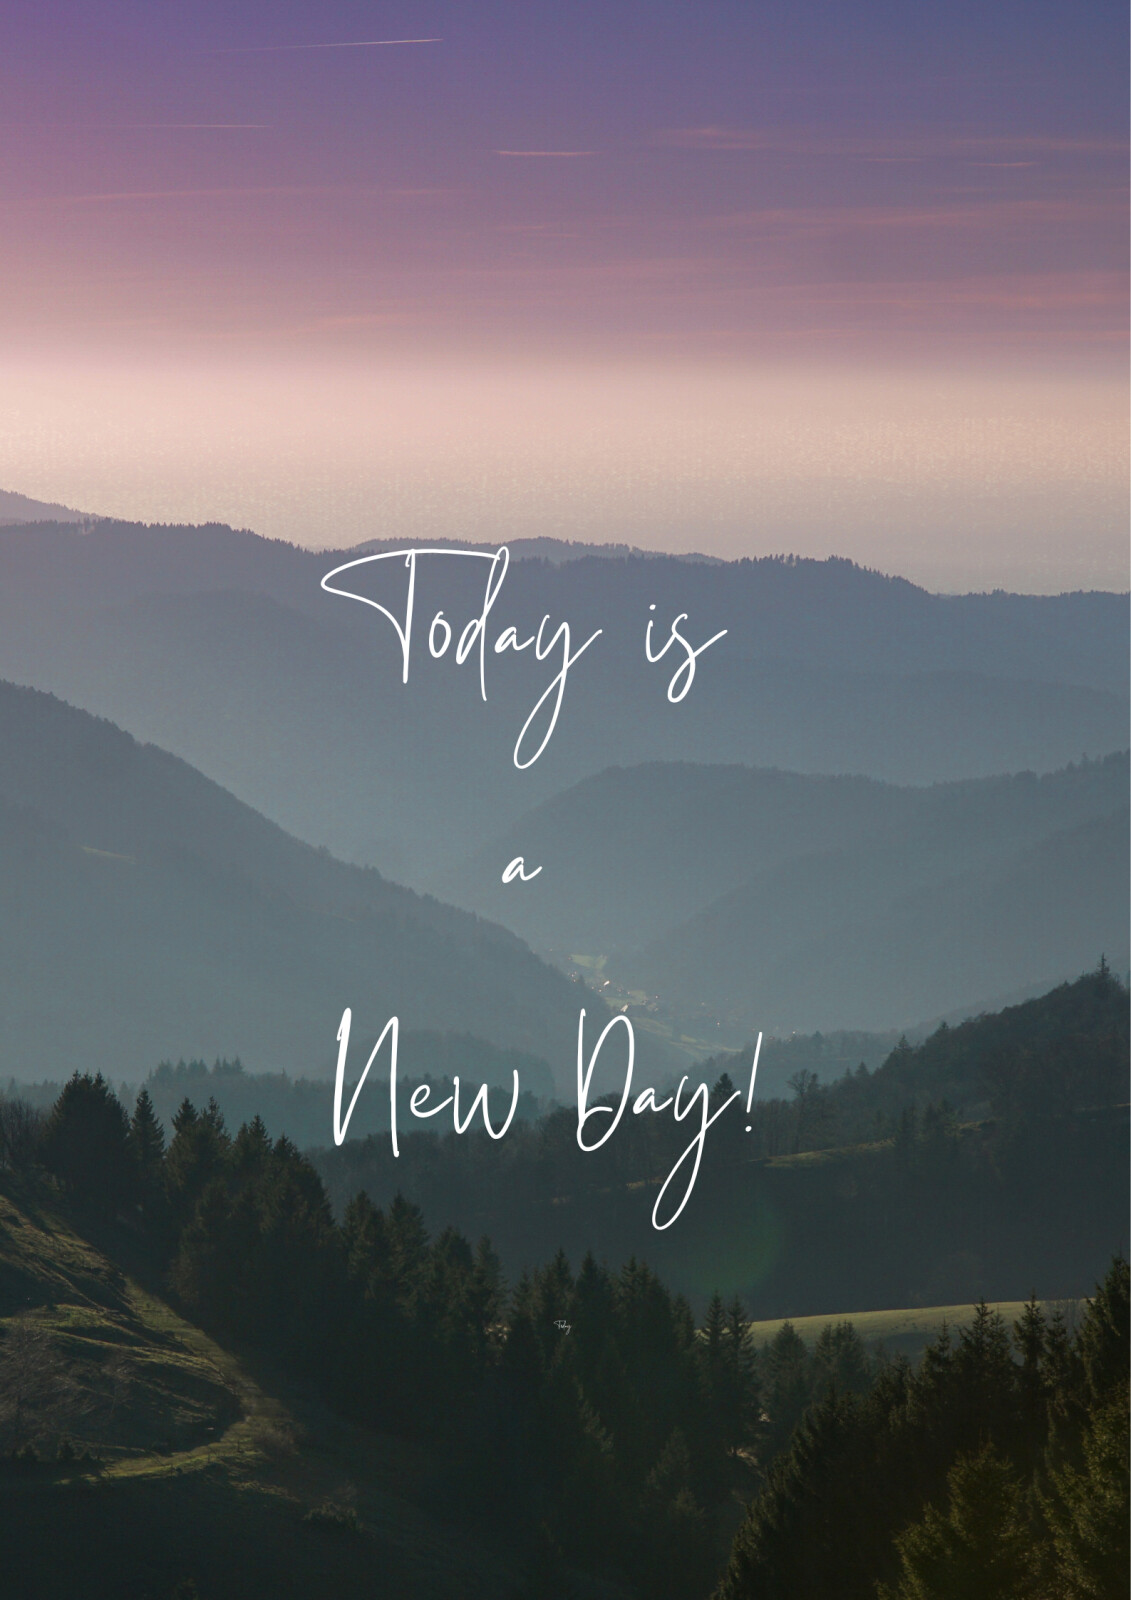 Today is a New Day!